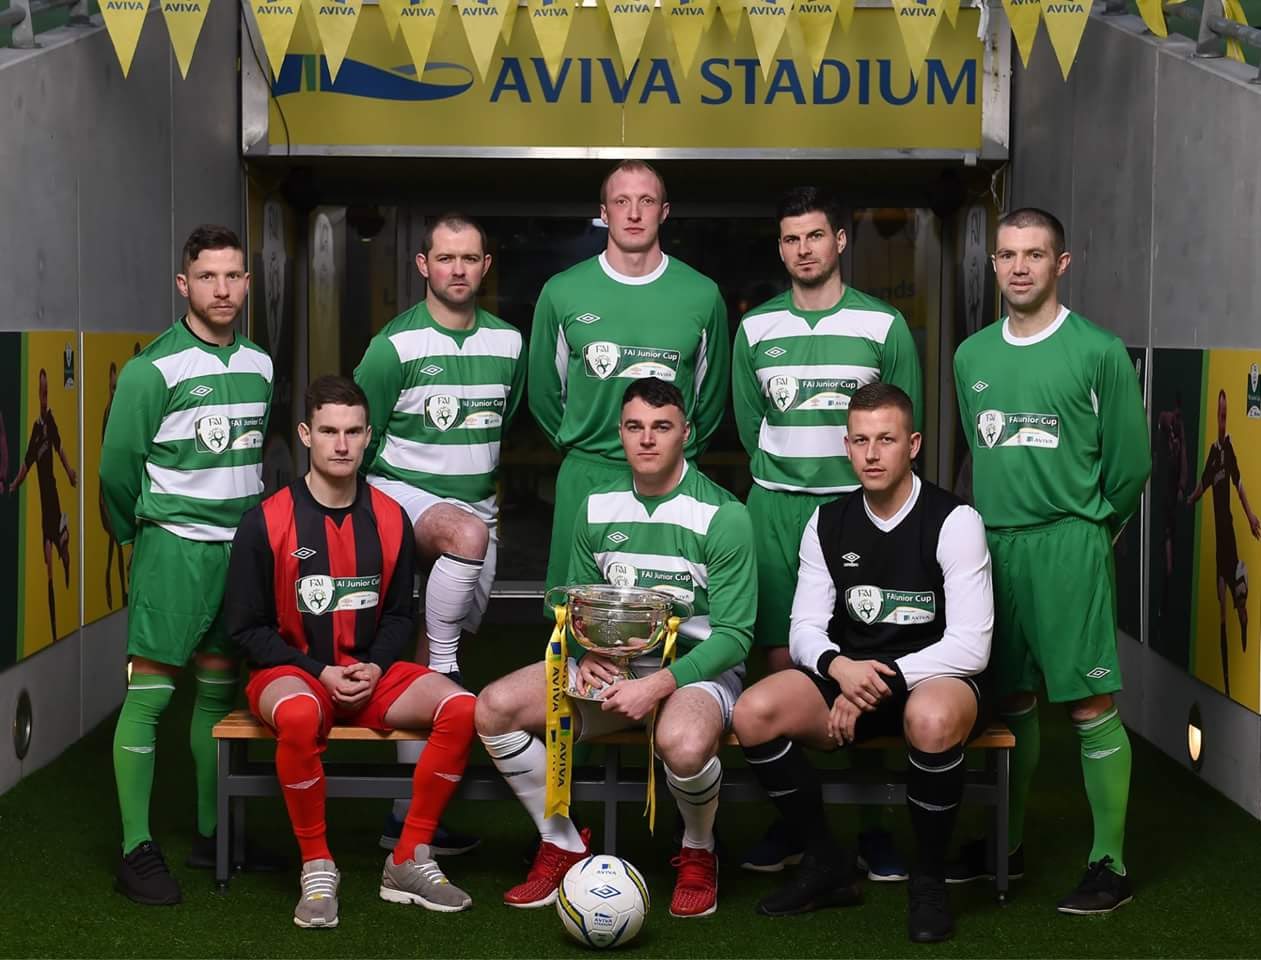 Players, including representatives of Evergreen FC, involved in the run in to the 2017 FAI Junior Cup Final